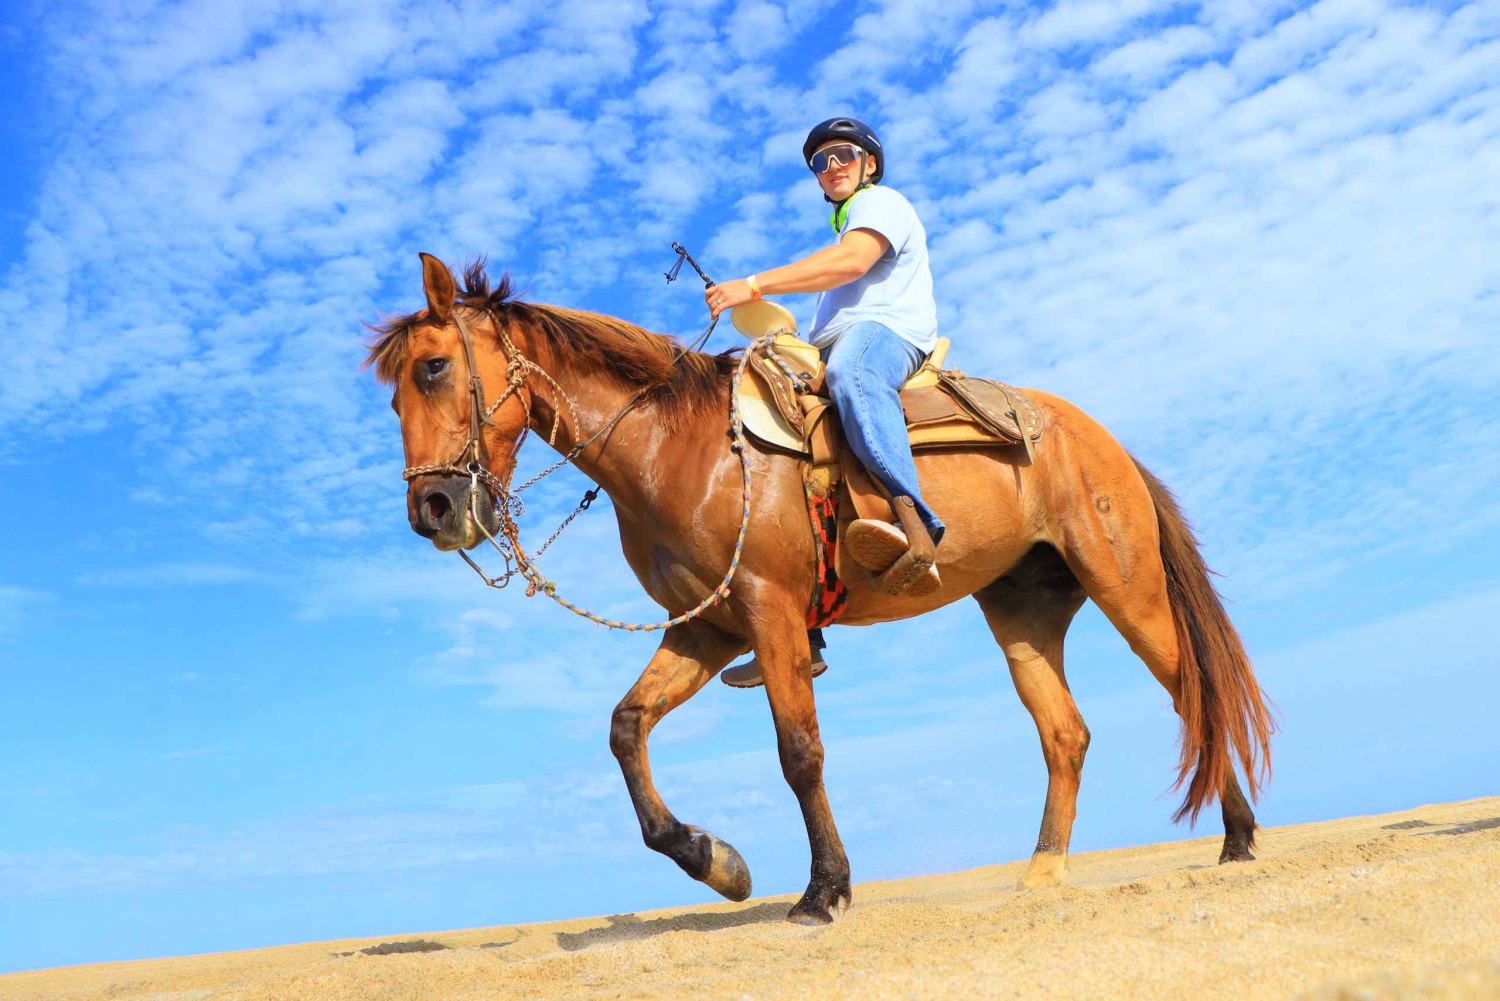 Los Cabos: Horseback Ride on Pacific Beach and Desert